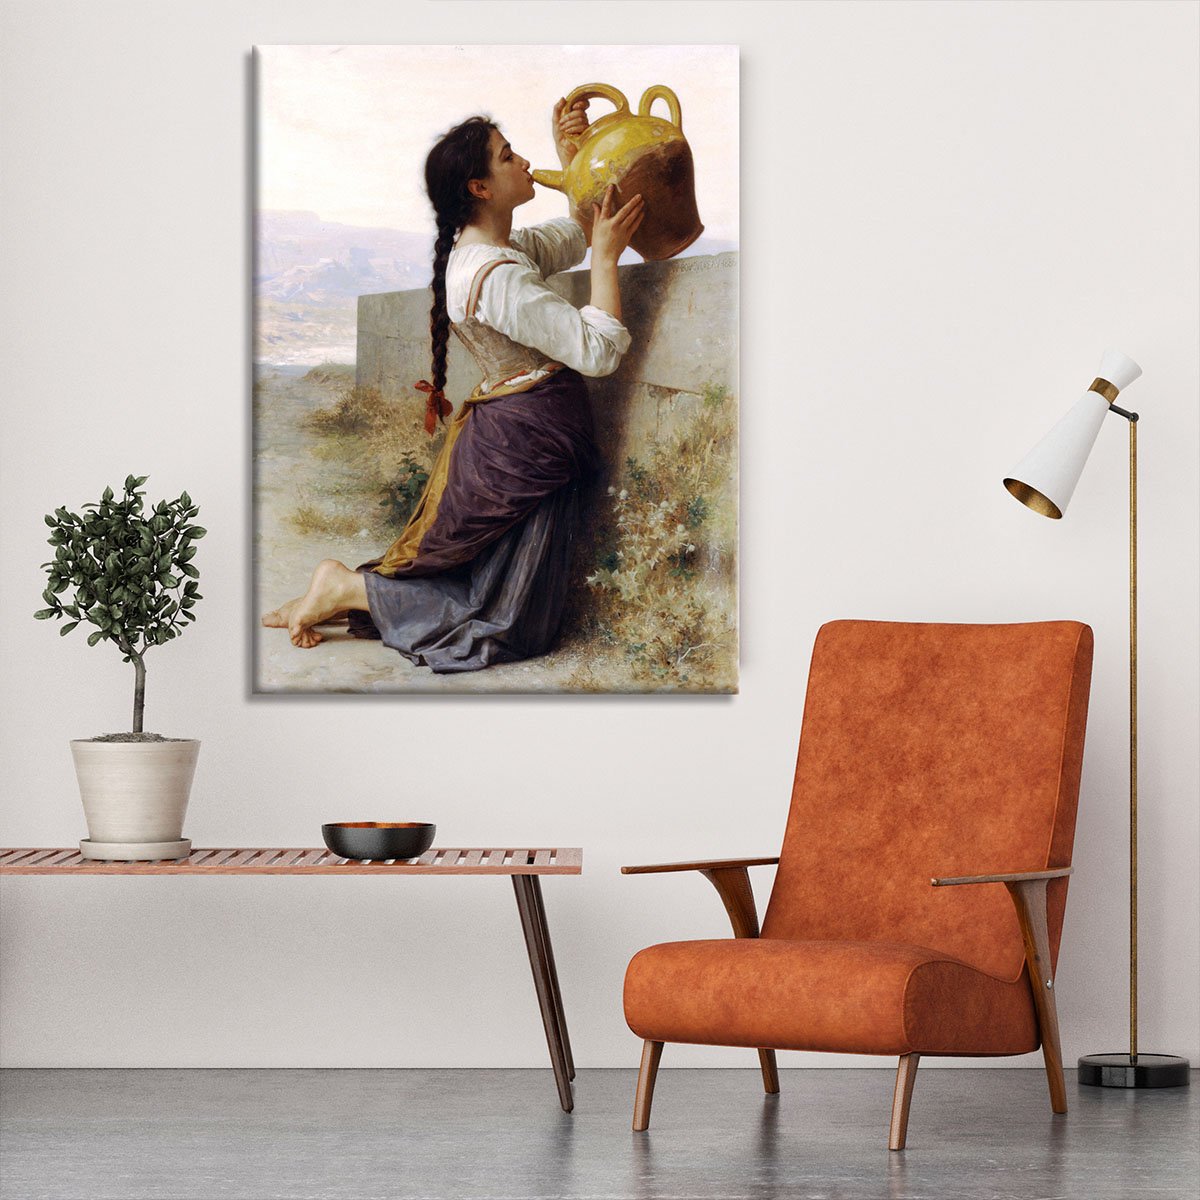 Thirst By Bouguereau Canvas Print or Poster